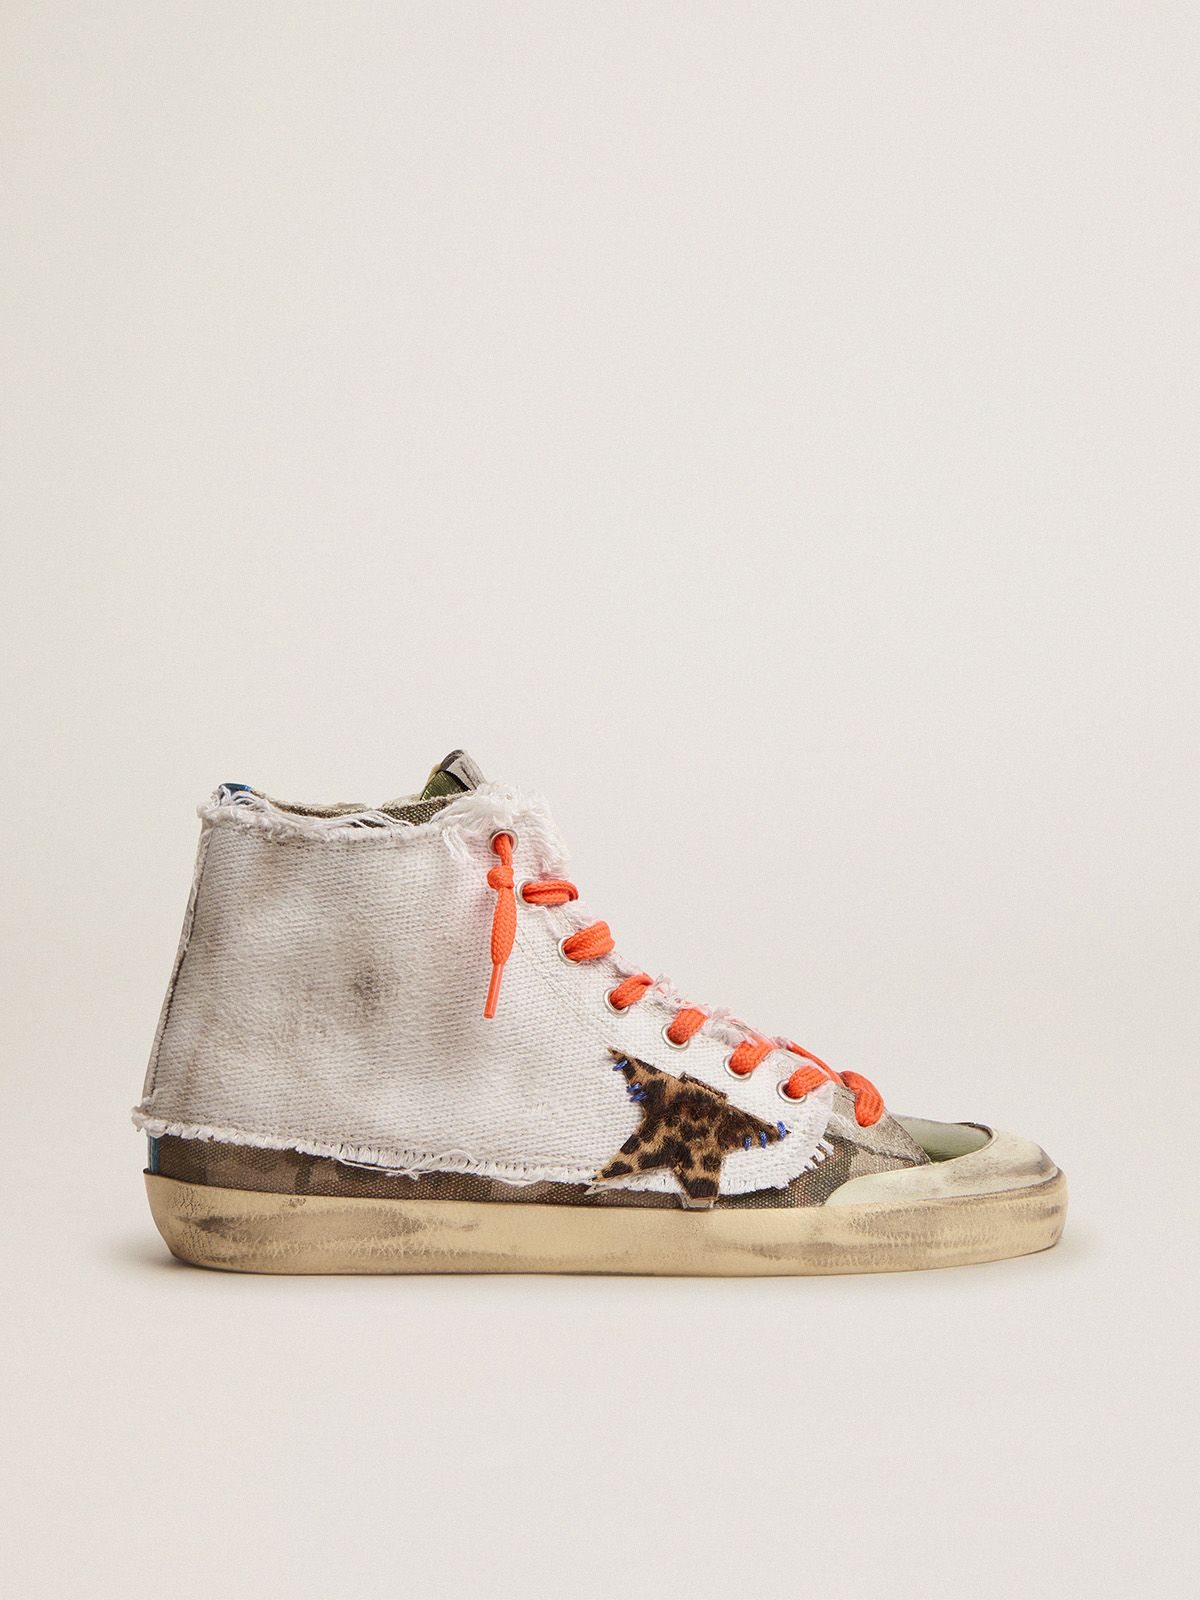 golden goose LAB camouflage print white with Penstar superimposed Francy sneakers and canvas